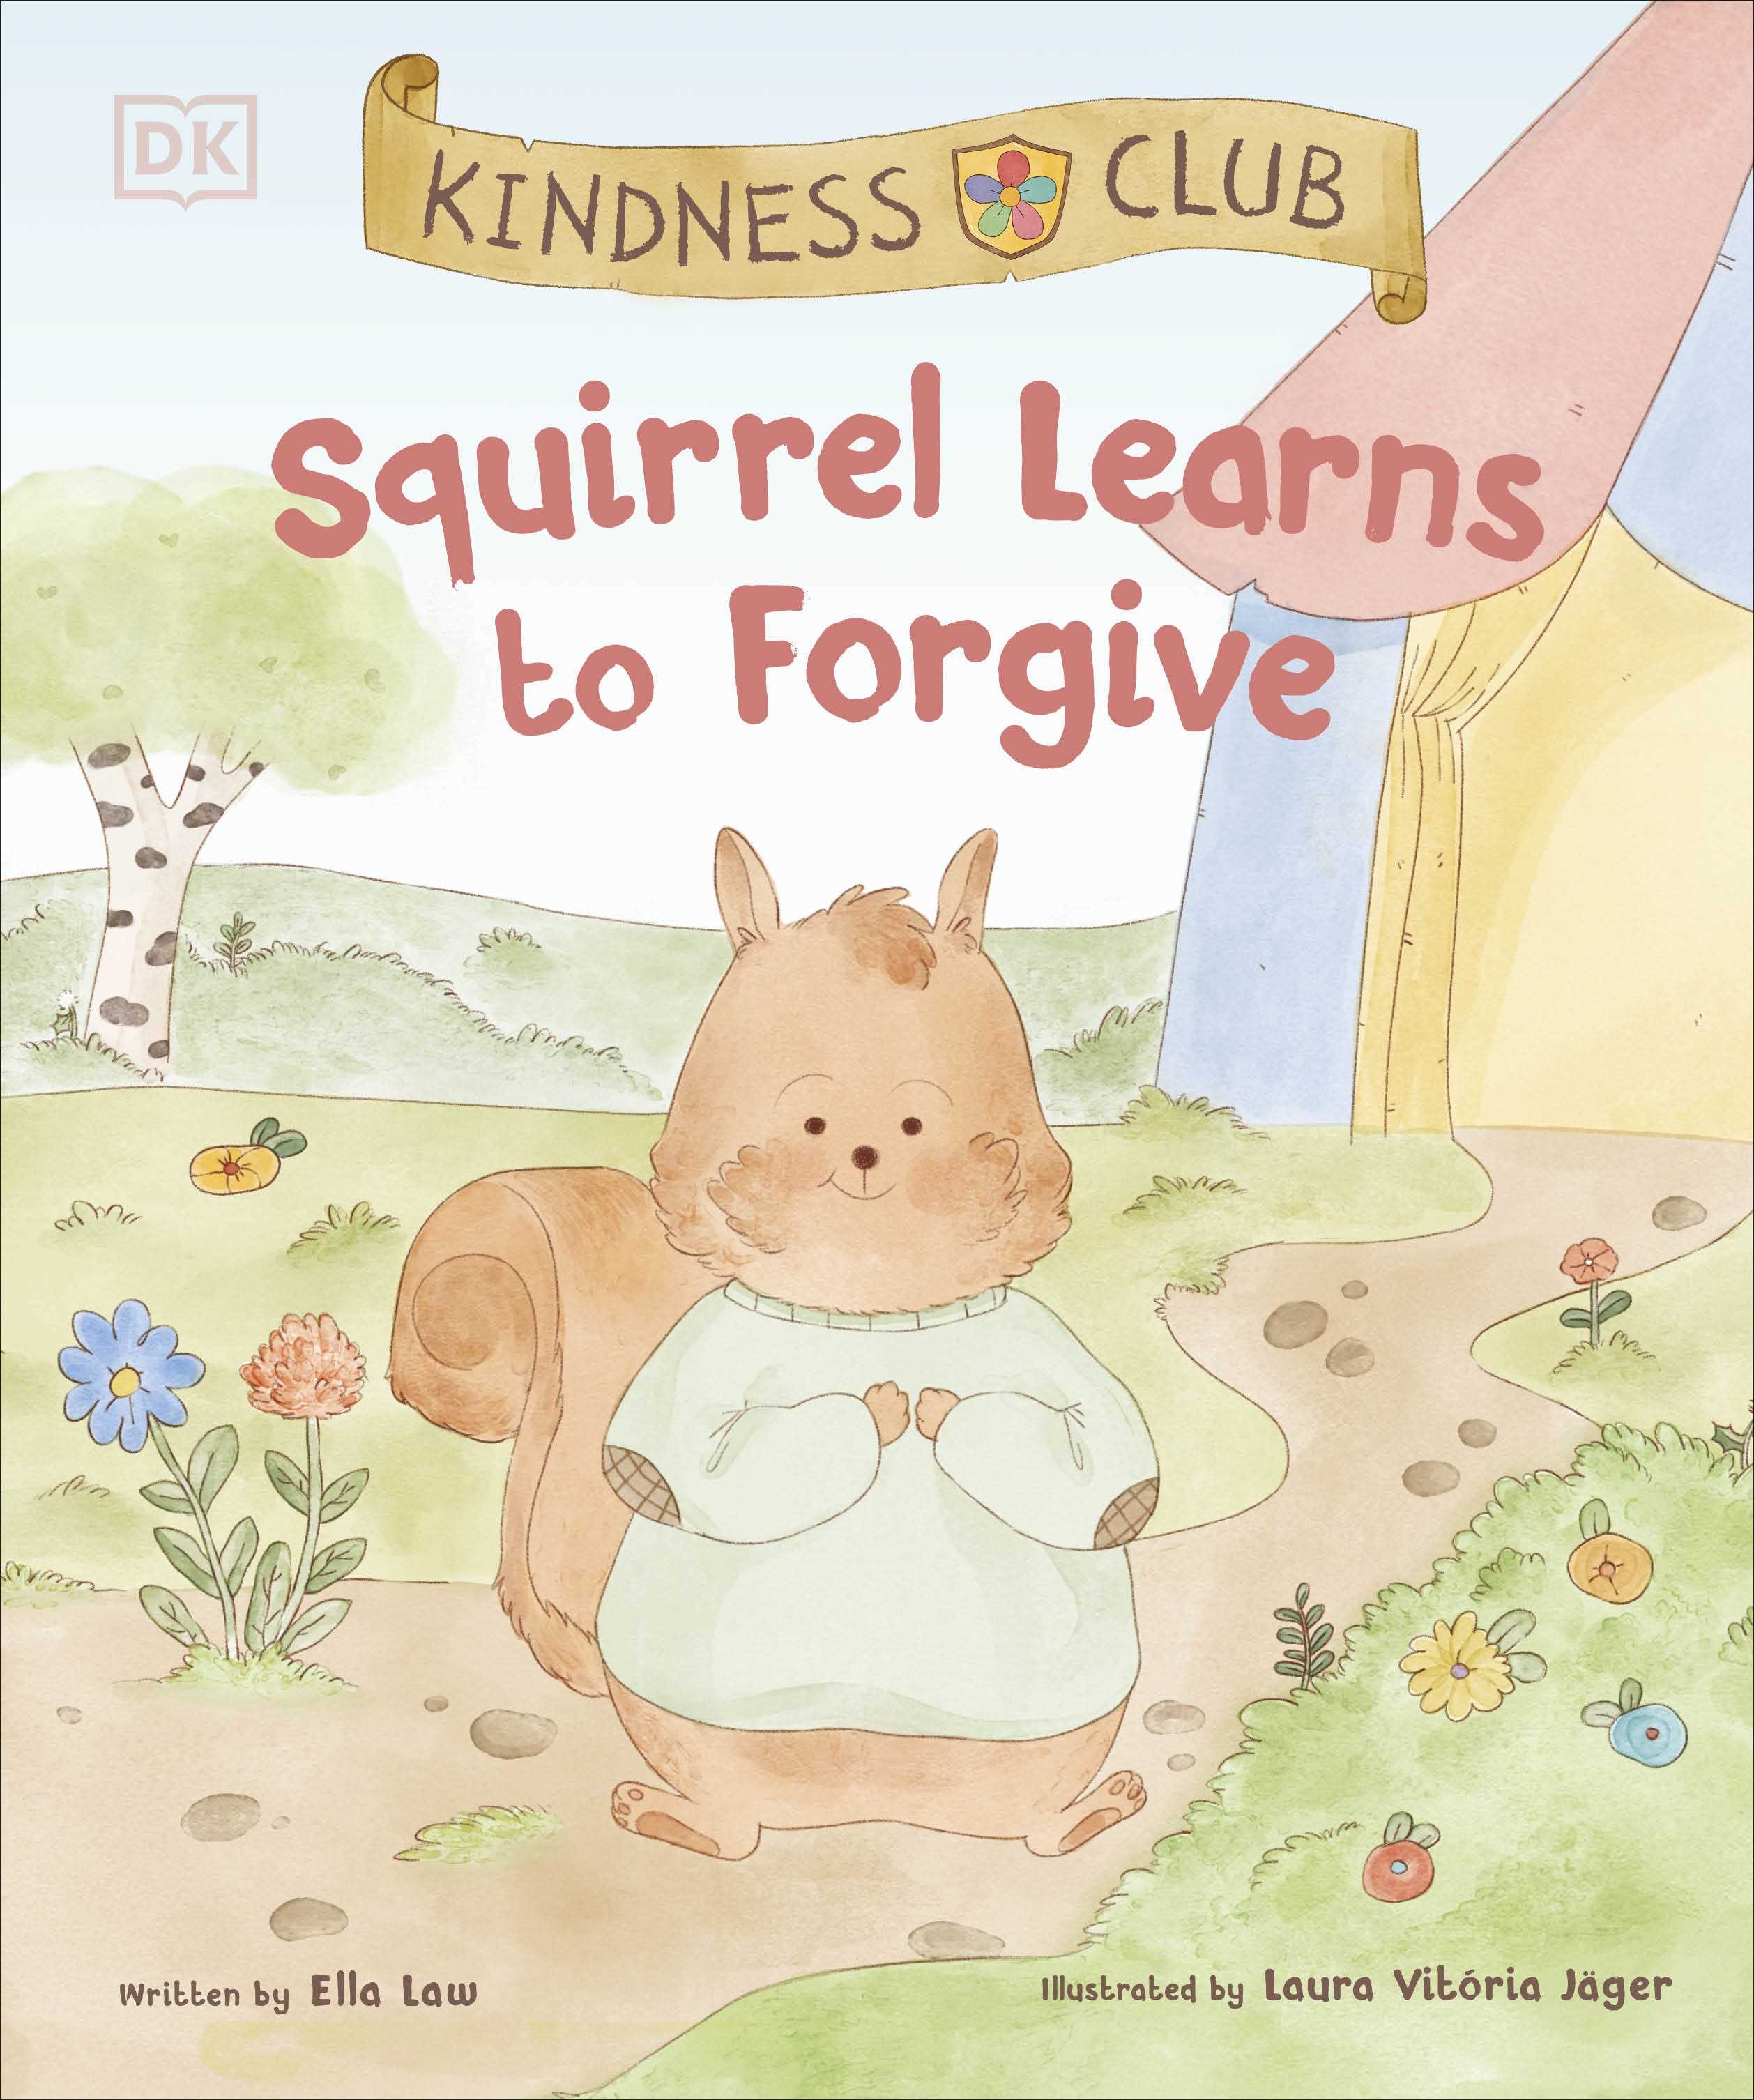 Squirrel Learns to Forgive (The Kindness Club)